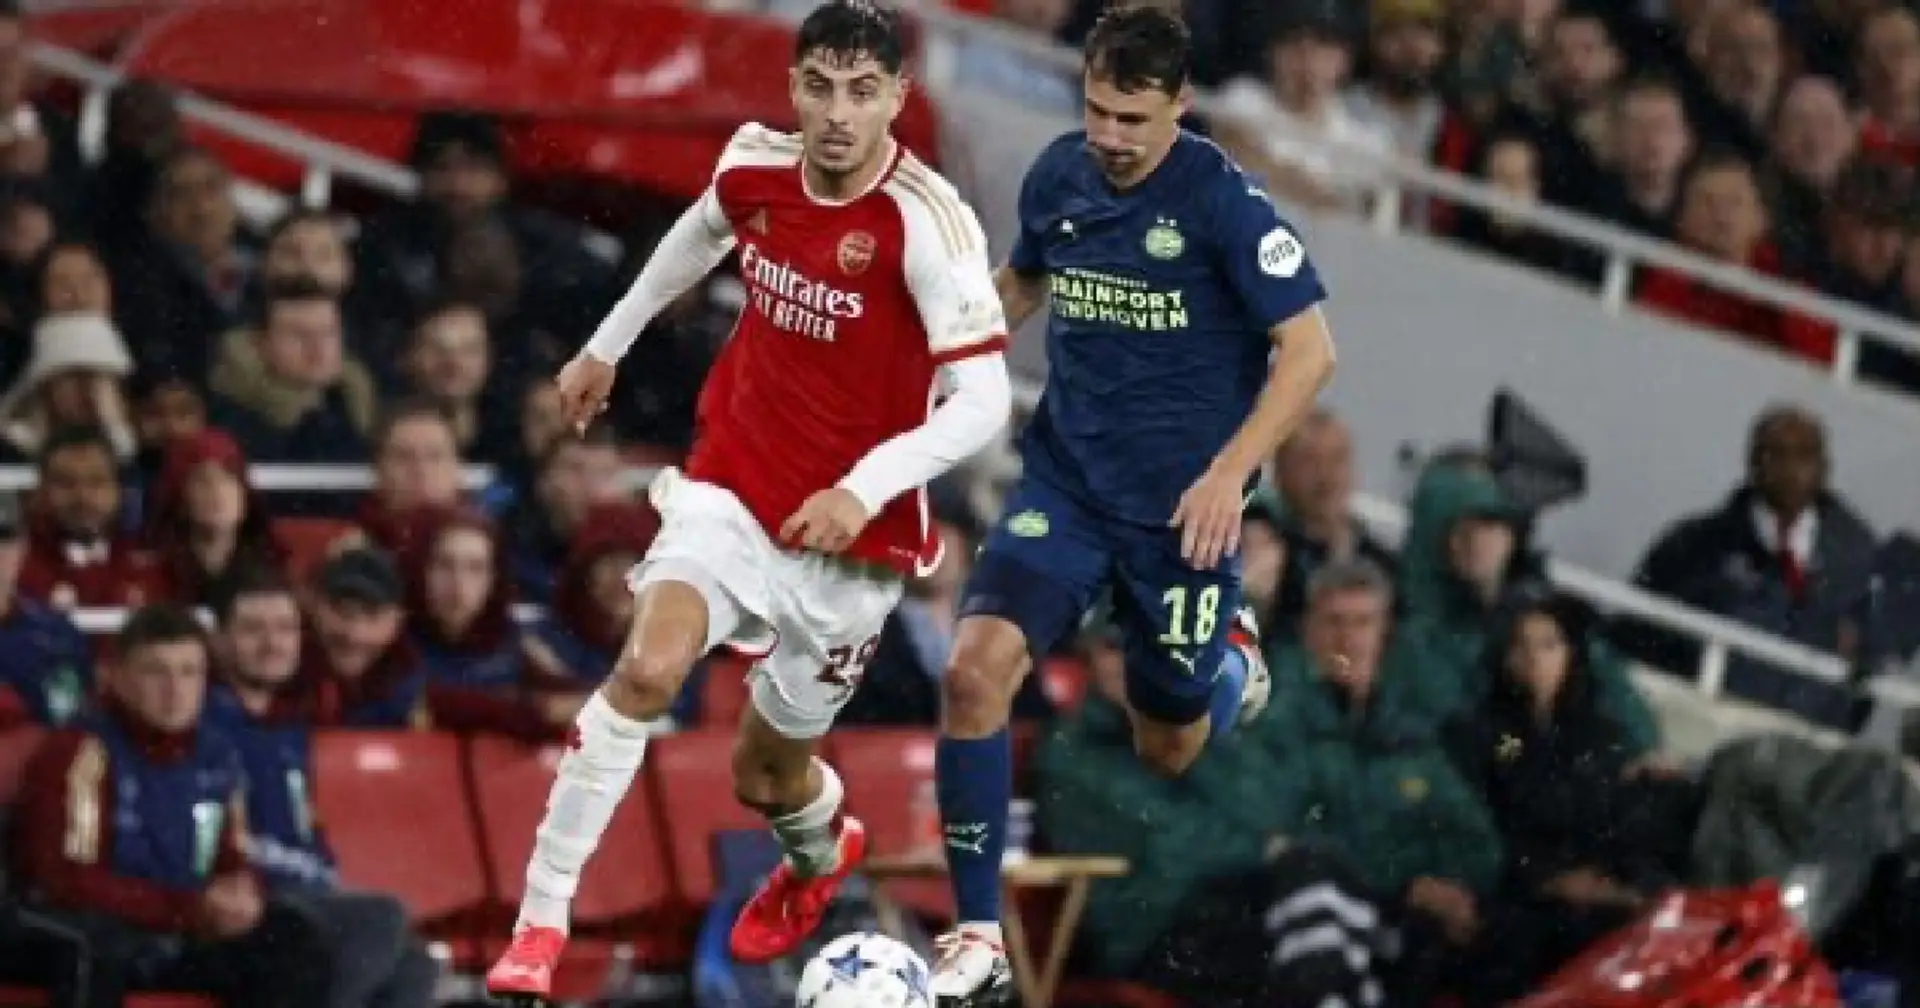 'Top performance tonight': Arsenal fans finally acknowledge Havertz's quality but want different role